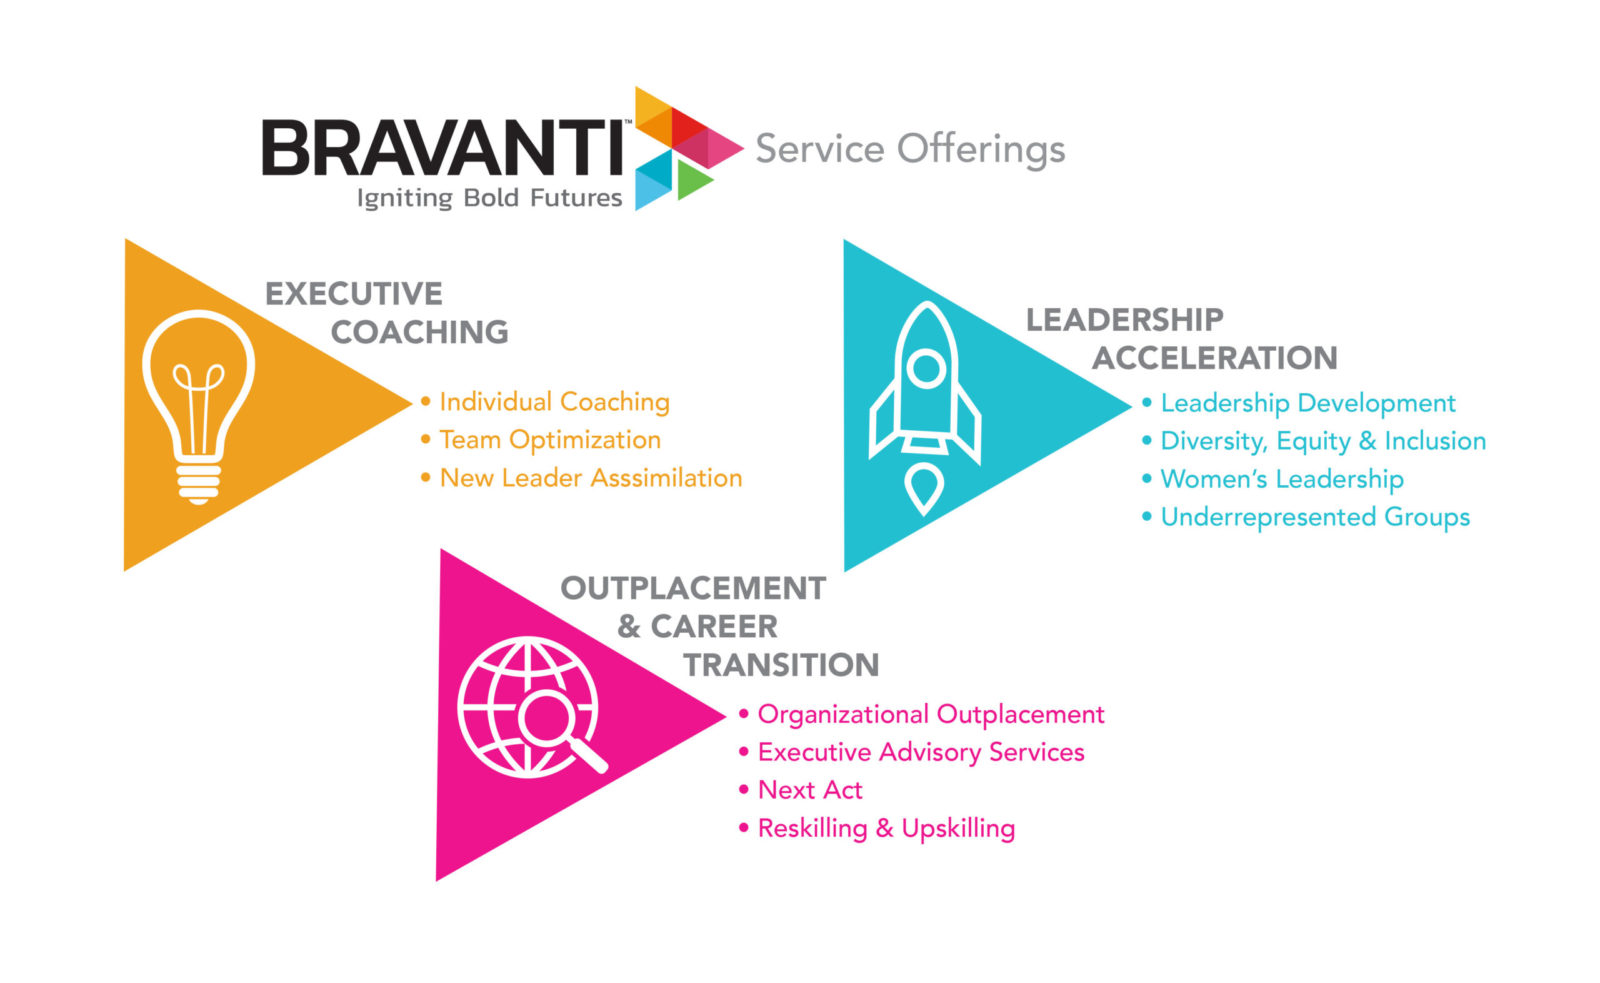 Bravanti offers executive coaching, leadership acceleration, and outplacement/career transition